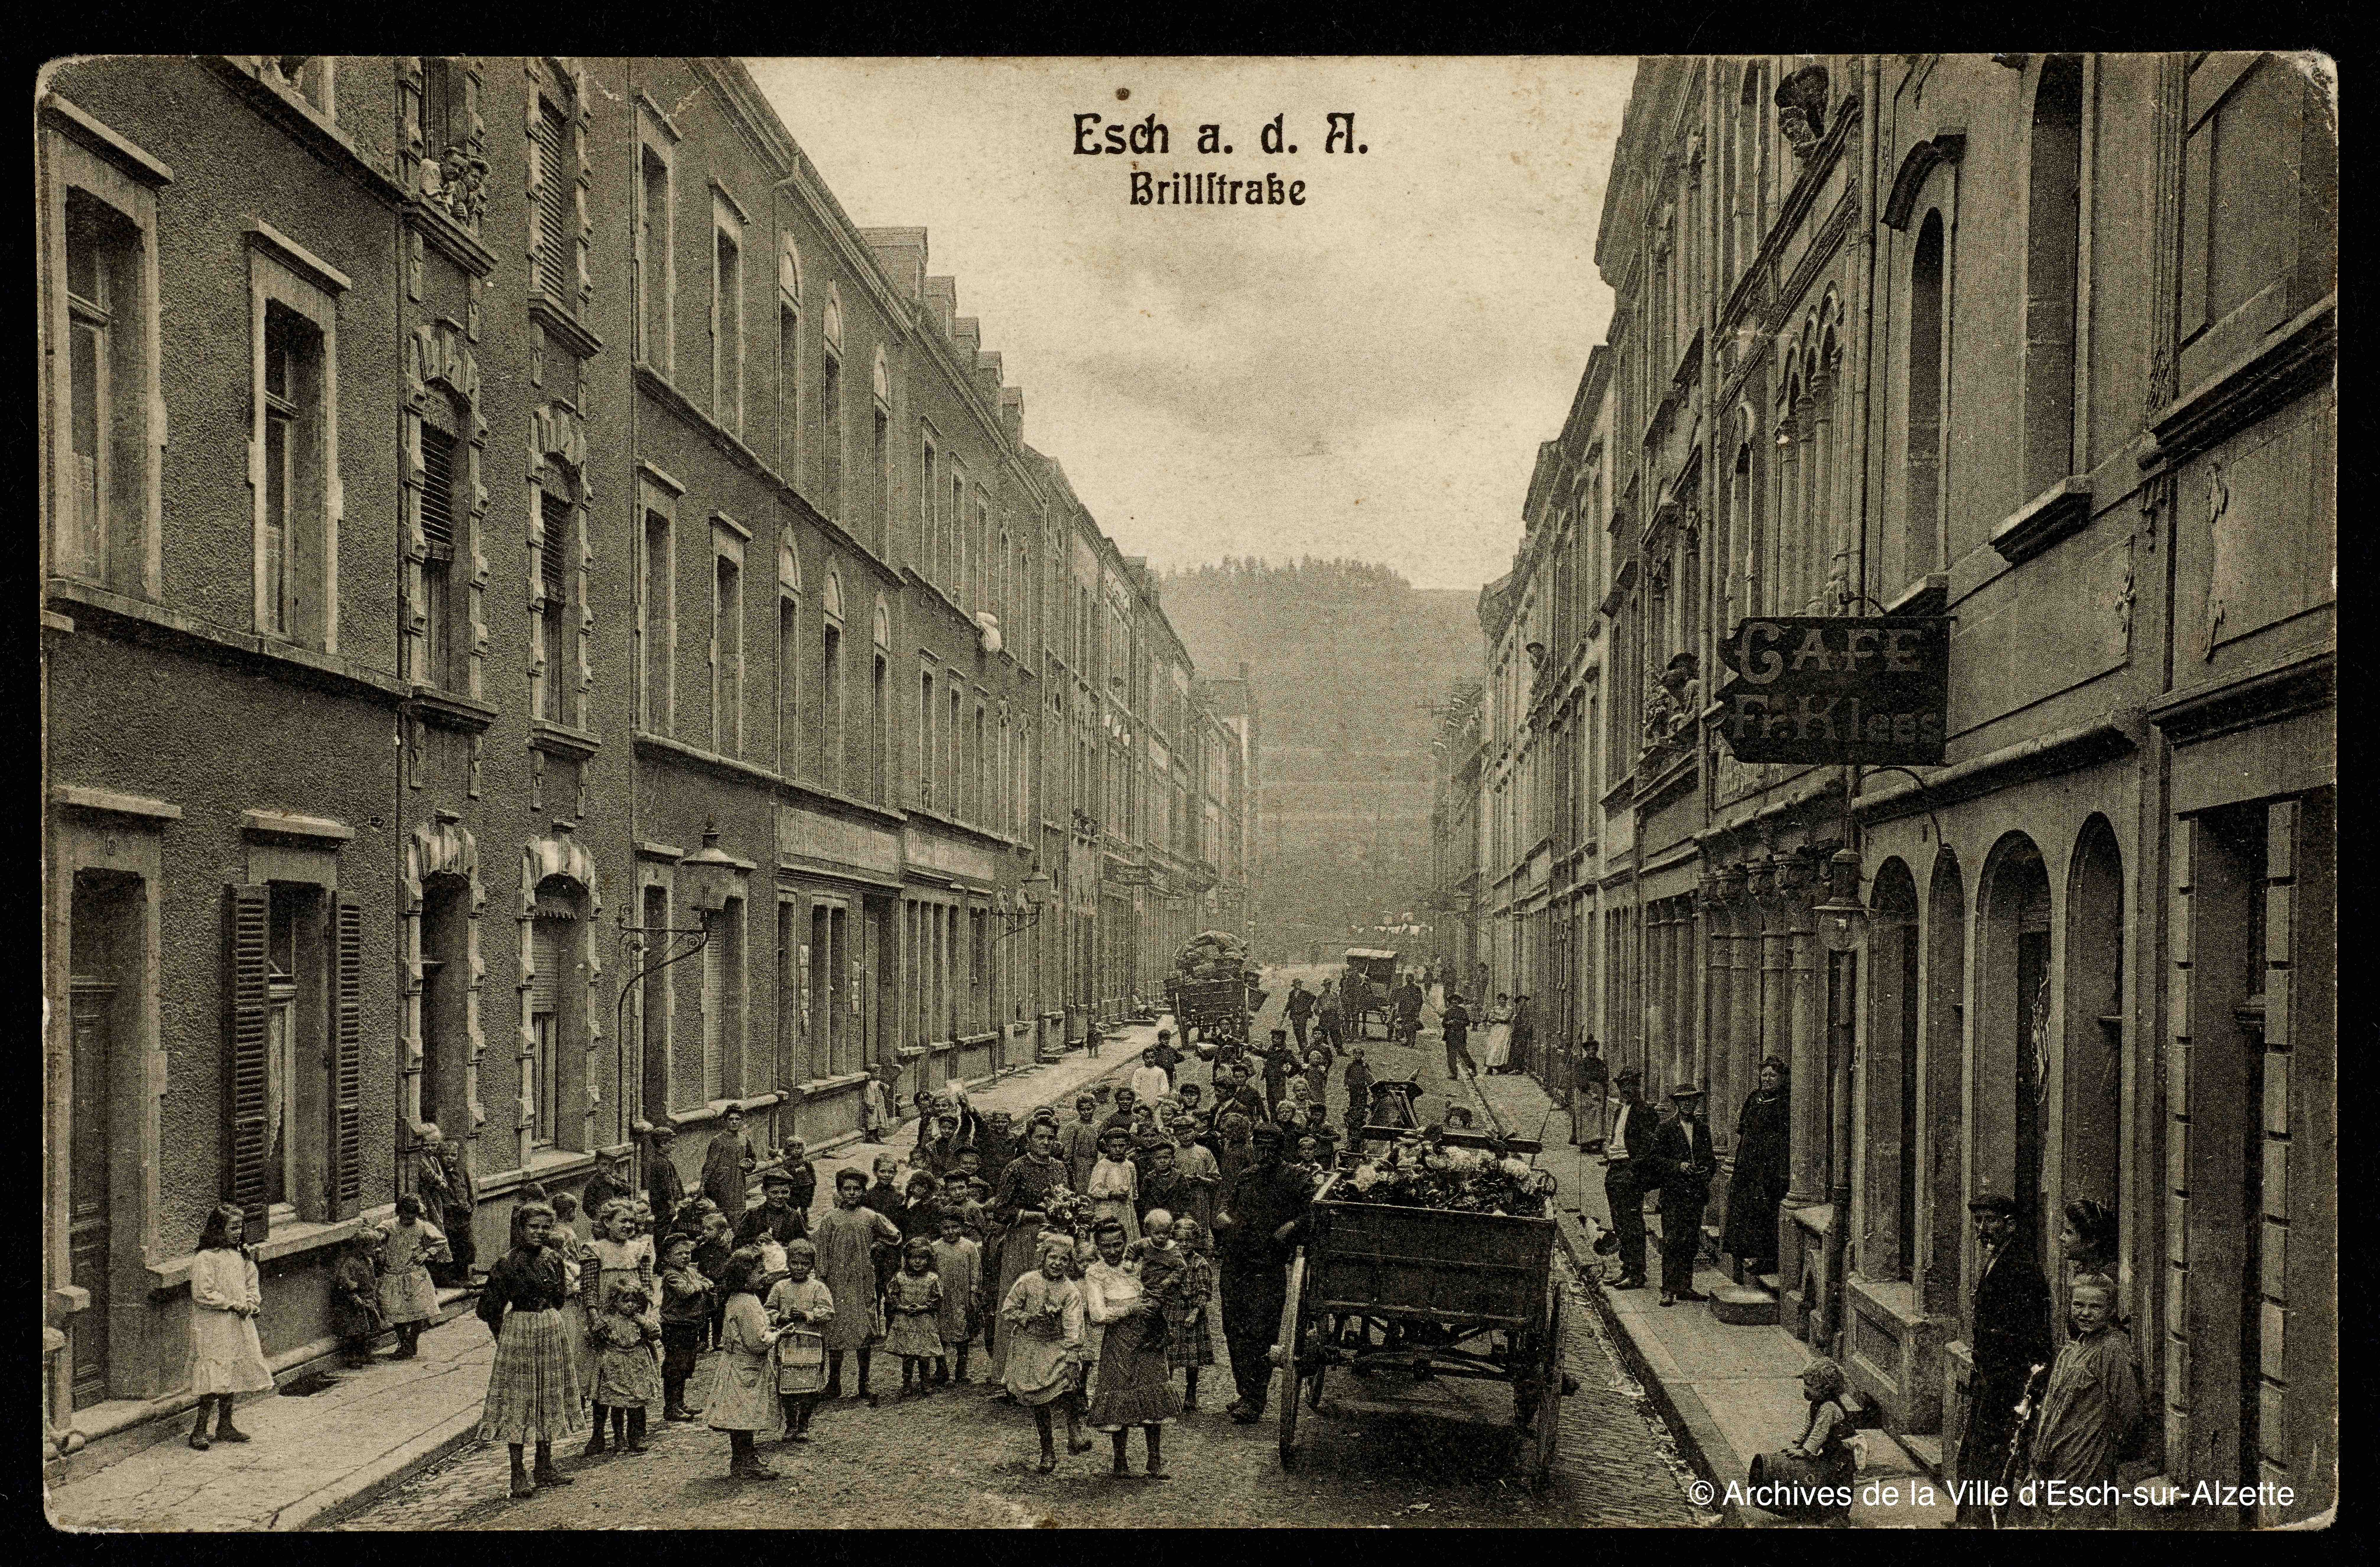 old sepia toned photograph of a crowded Brill Street filled with people, a cart, and tall buildings on either side